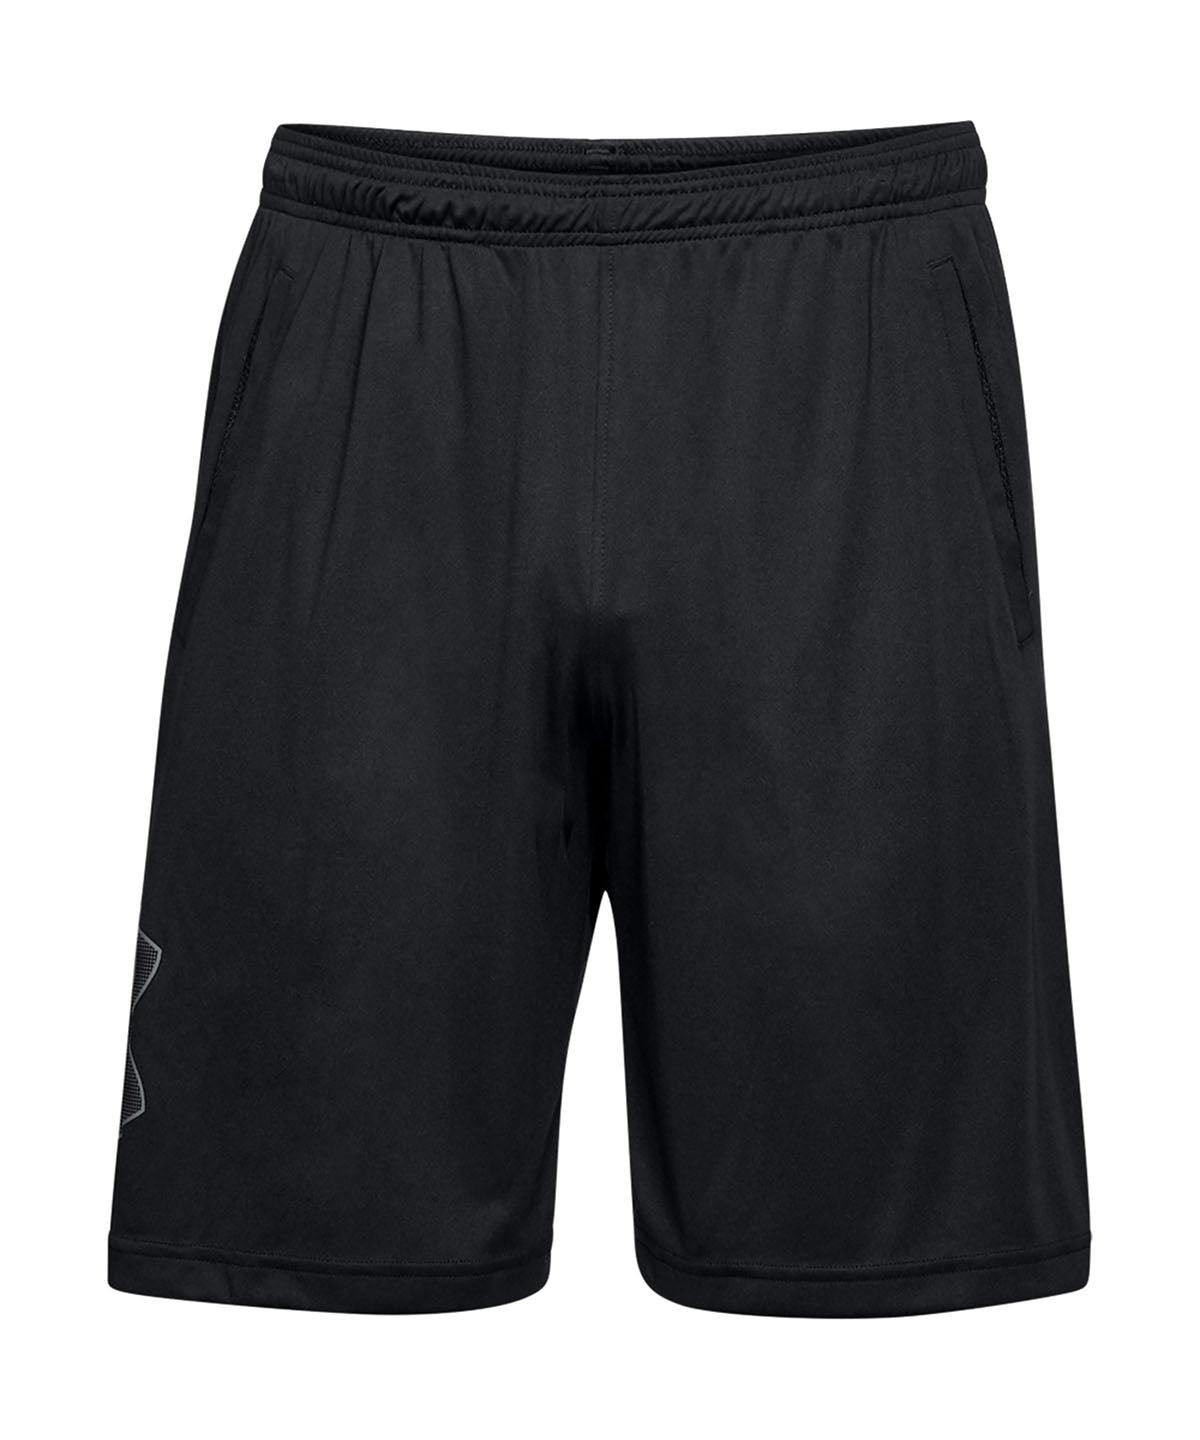 Black/Graphite - Tech™ graphic shorts Shorts Under Armour Activewear & Performance, Back to the Gym, Exclusives, Gymwear, Must Haves, Plus Sizes, Premium, Premium Sports, Sports & Leisure, Team Sportswear, Trousers & Shorts Schoolwear Centres